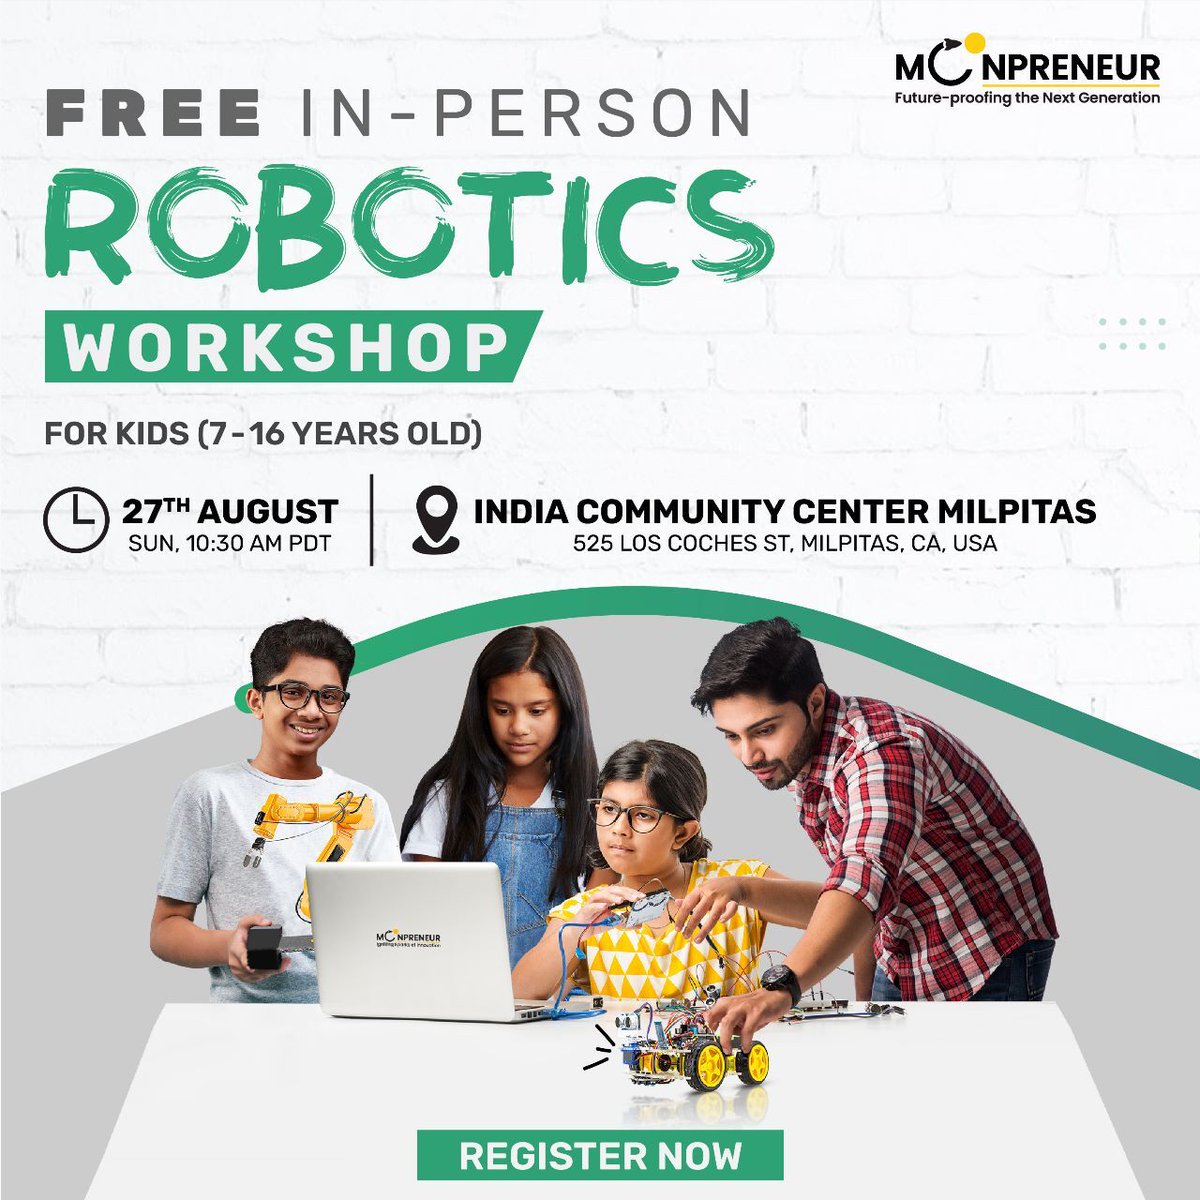 Mark your calendars! Our next in-person robotics workshop is set for August 26th at the India Community Center Milpitas. 

Register now to secure your spot and be a part of this amazing learning journey!  bit.ly/3KFkwDd
#RoboticsWorkshop #InpersonWorkshop #Workshop